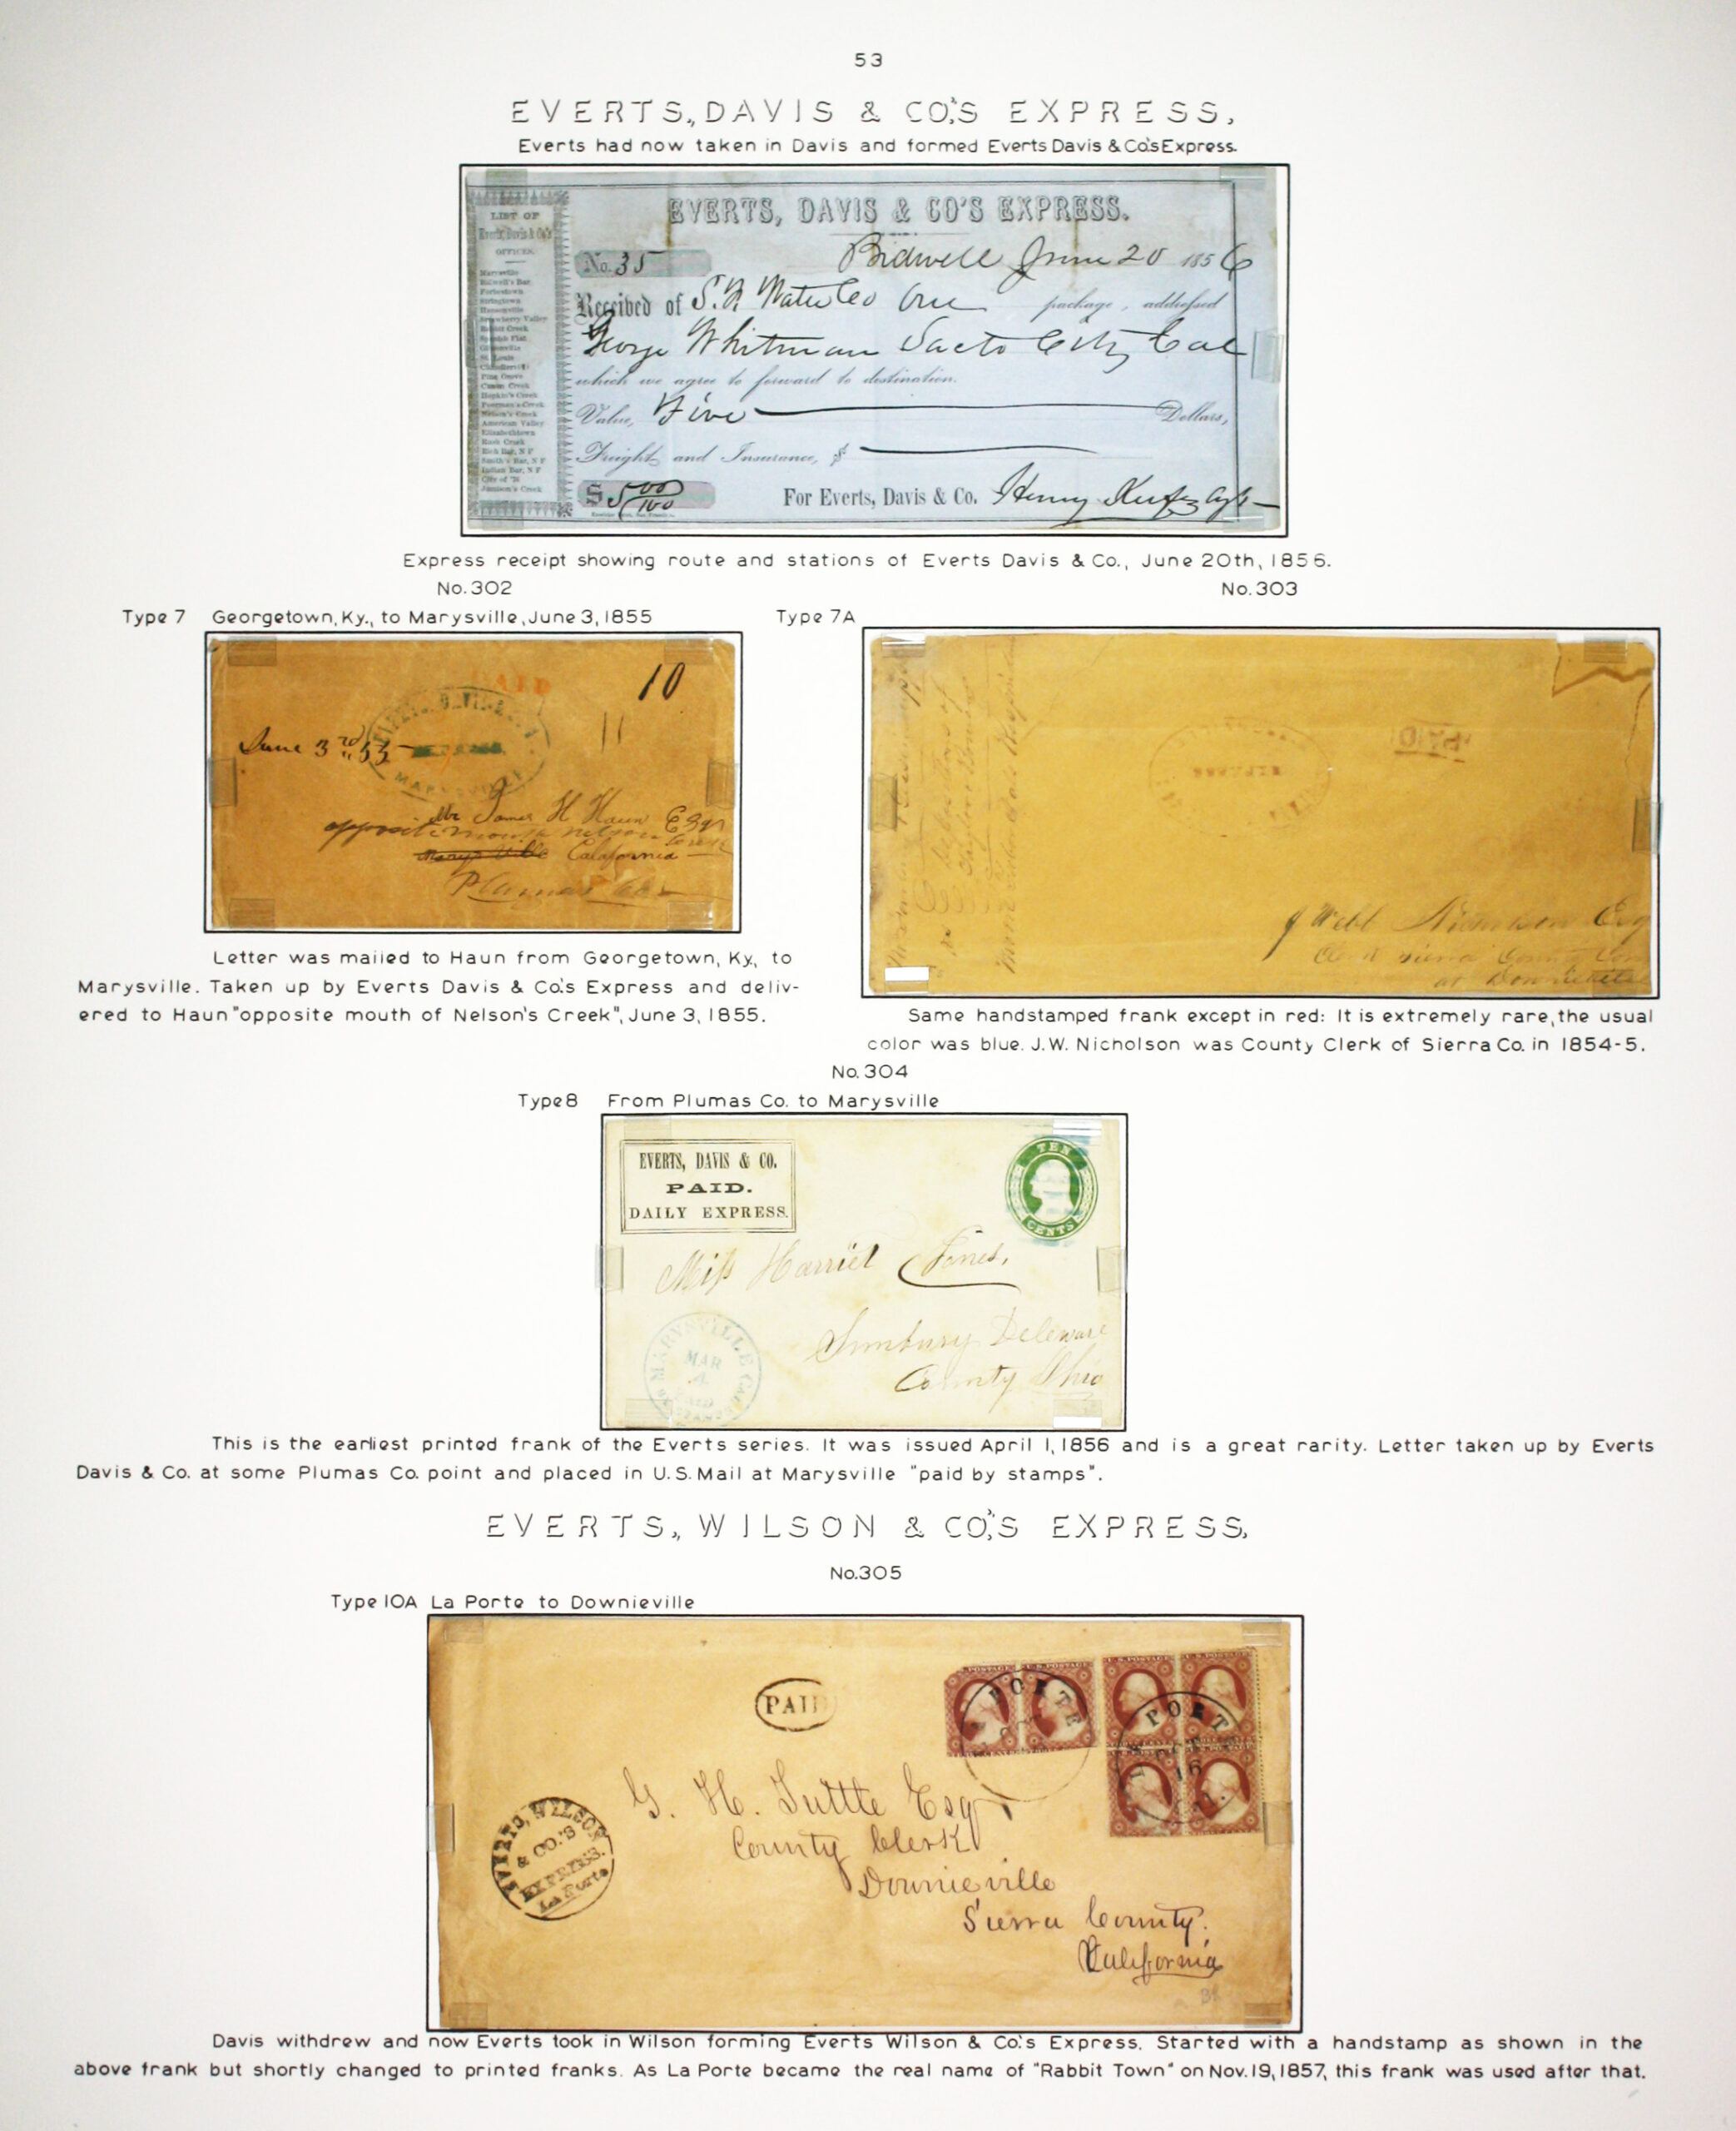 Historic exhibit Panel #53 featuring letter covers and an express receipt. Long descriptions are available as page content. Image link will enlarge image.